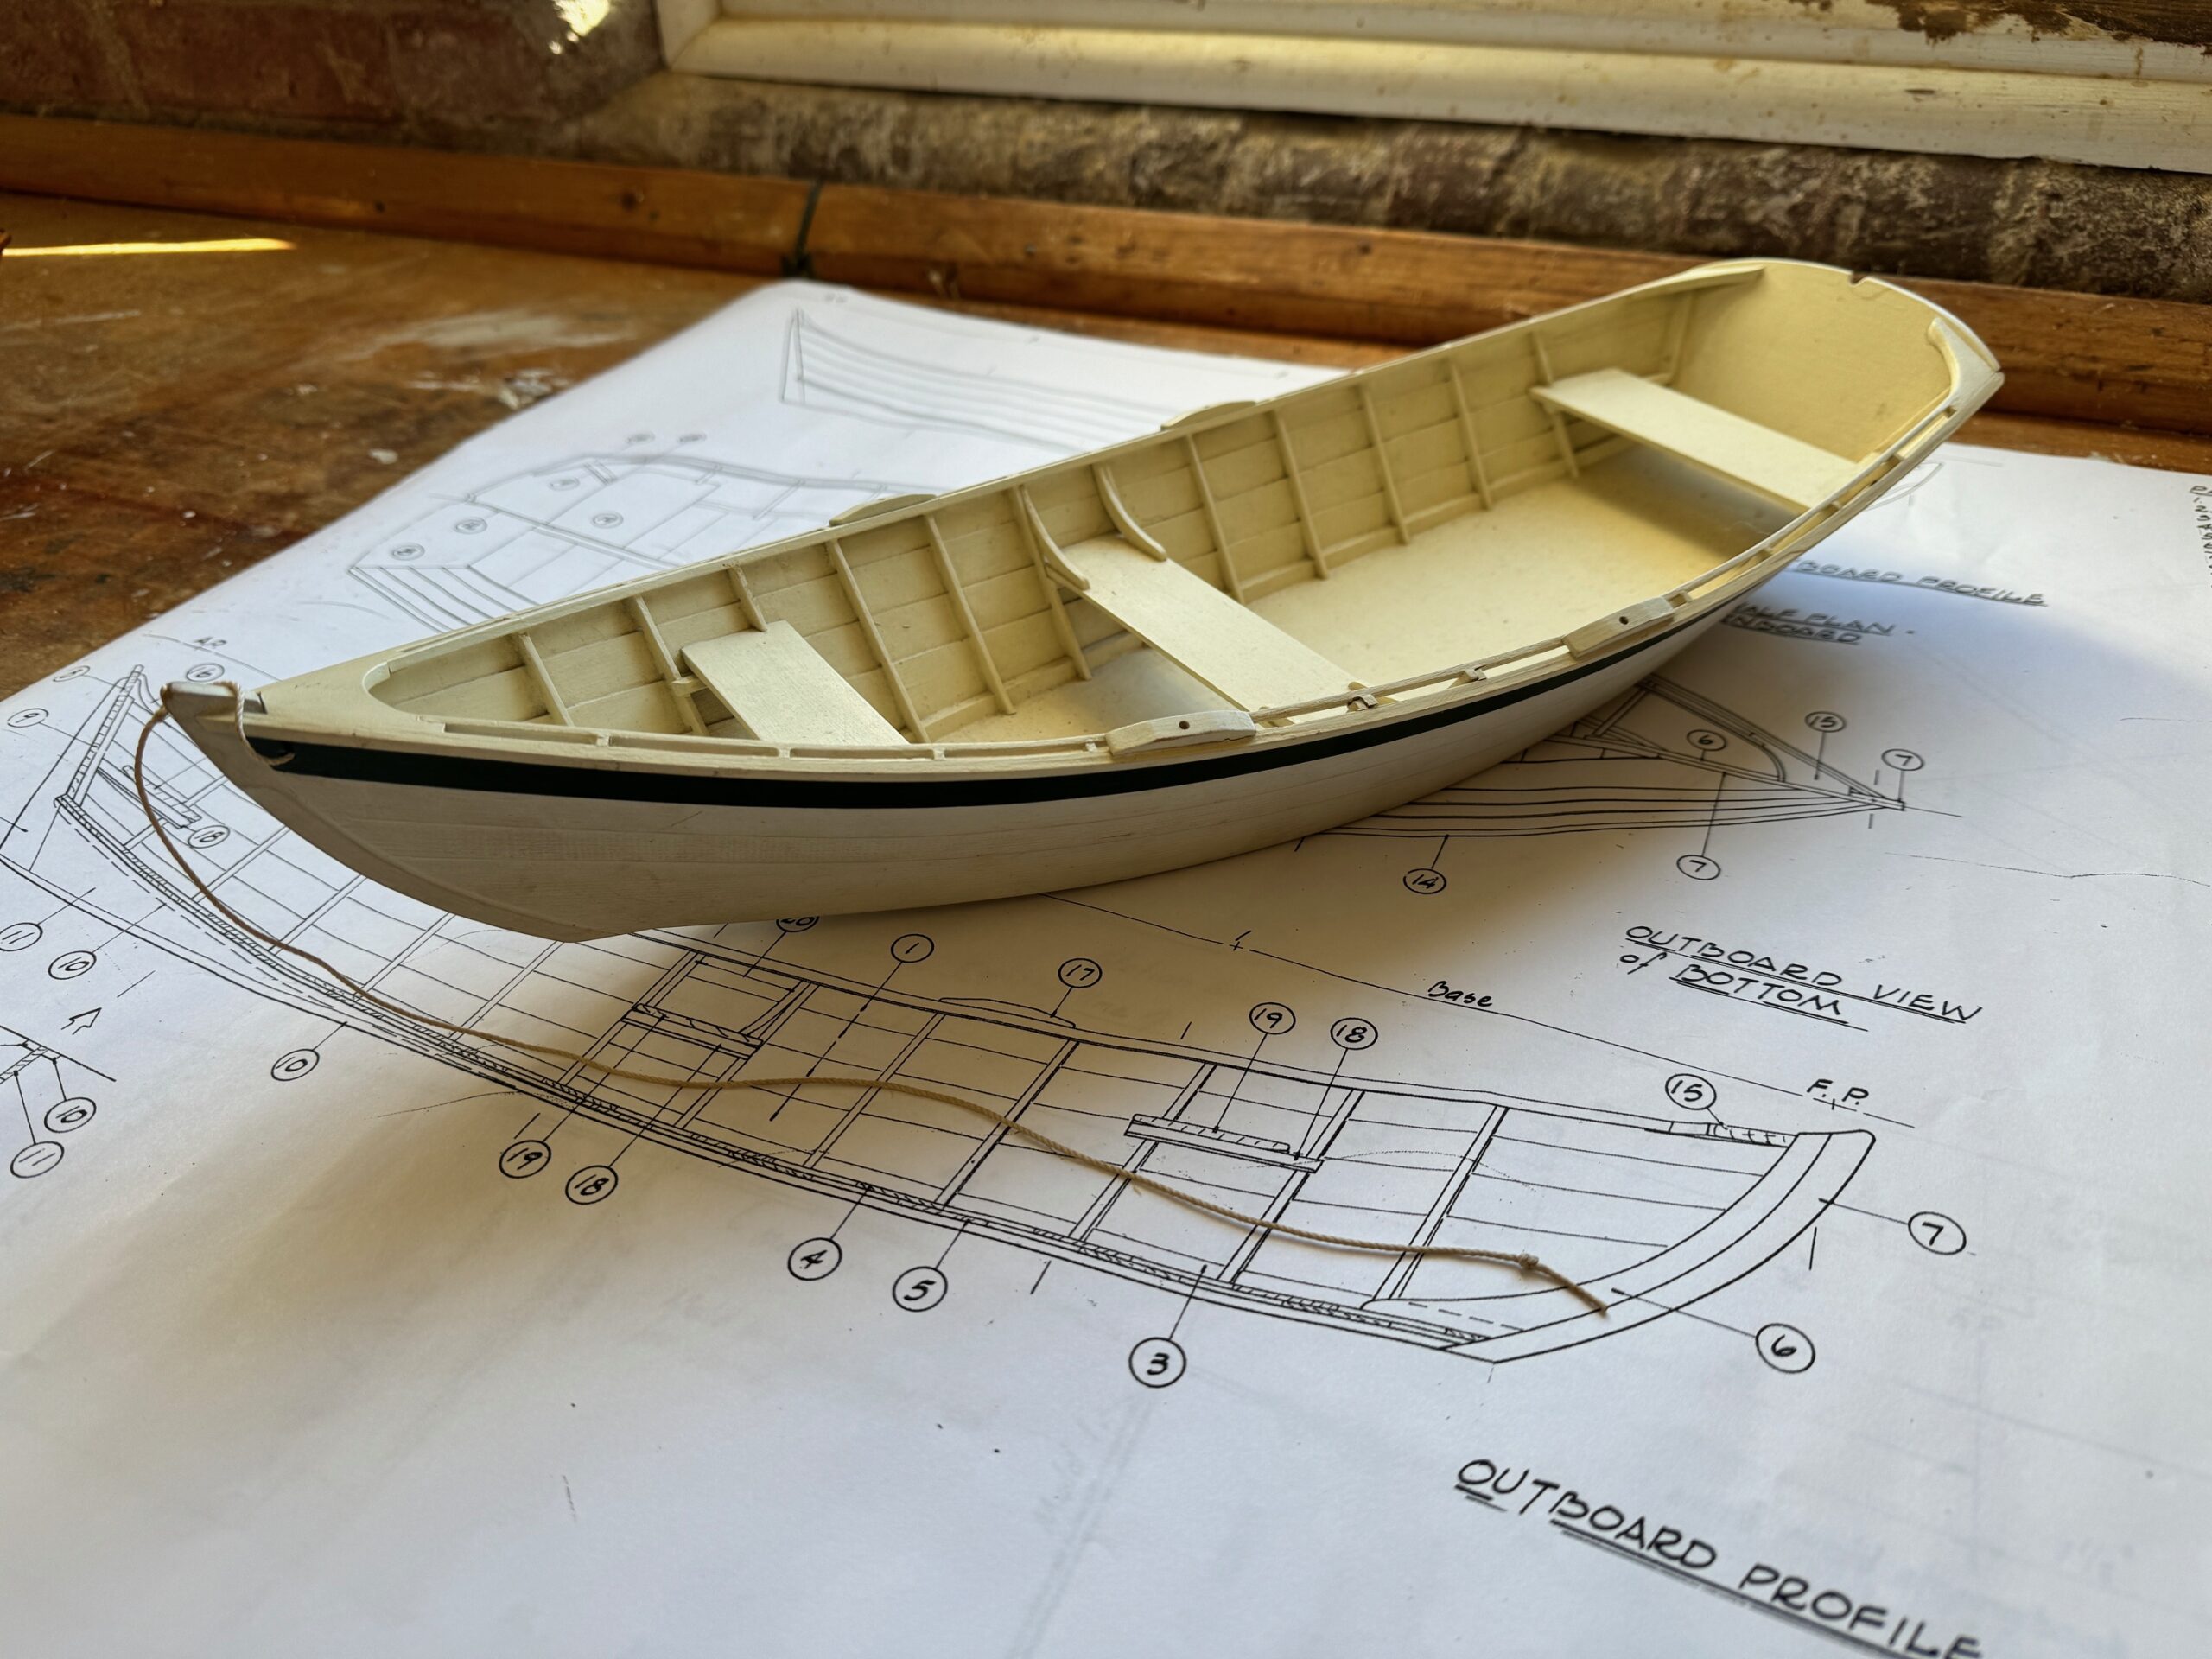 Introduction to Building Model Boats